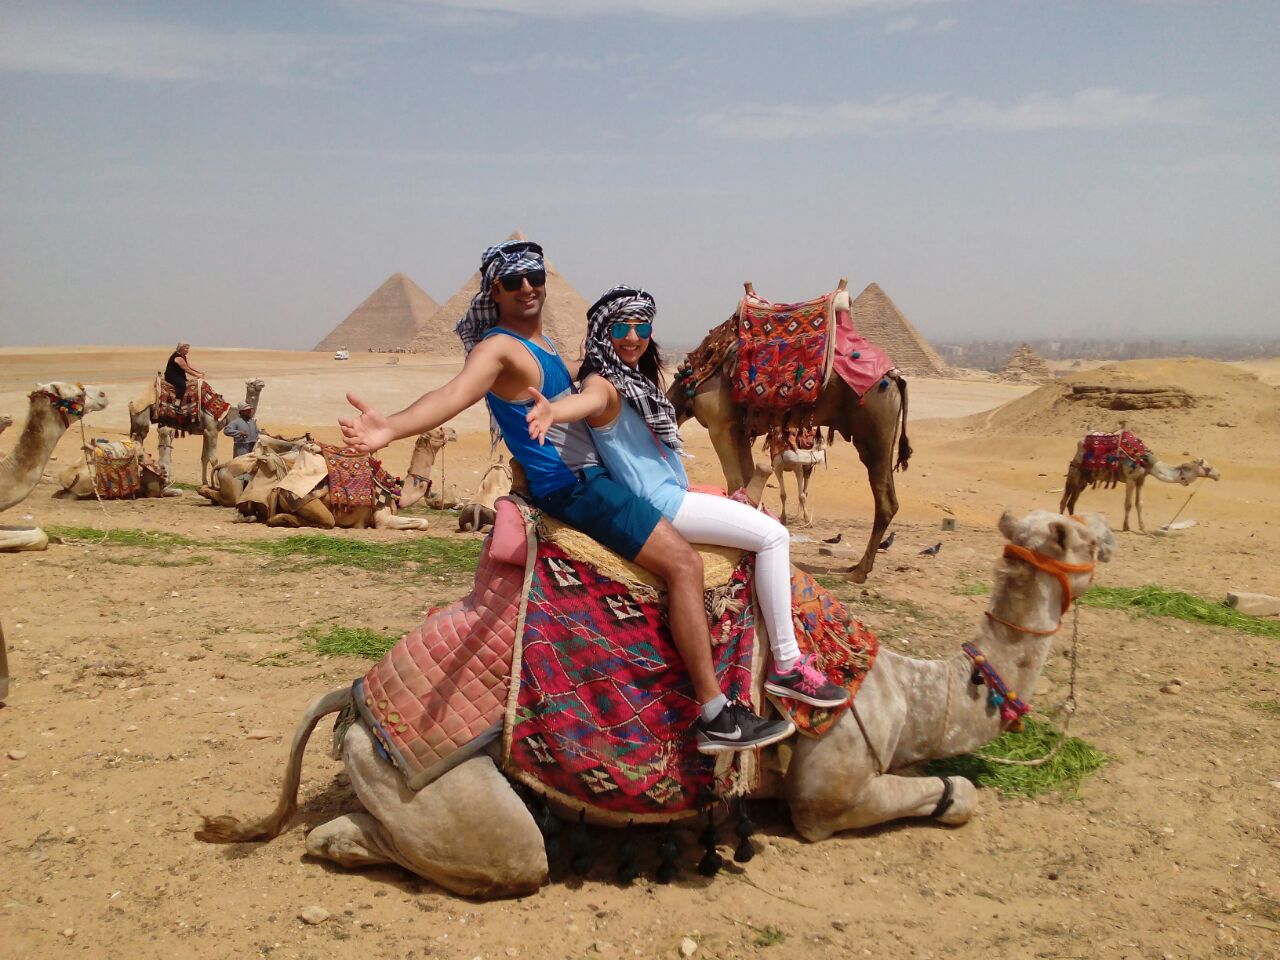 10-Day Cairo Nile Cruise from Aswan to Luxor and Hurghada